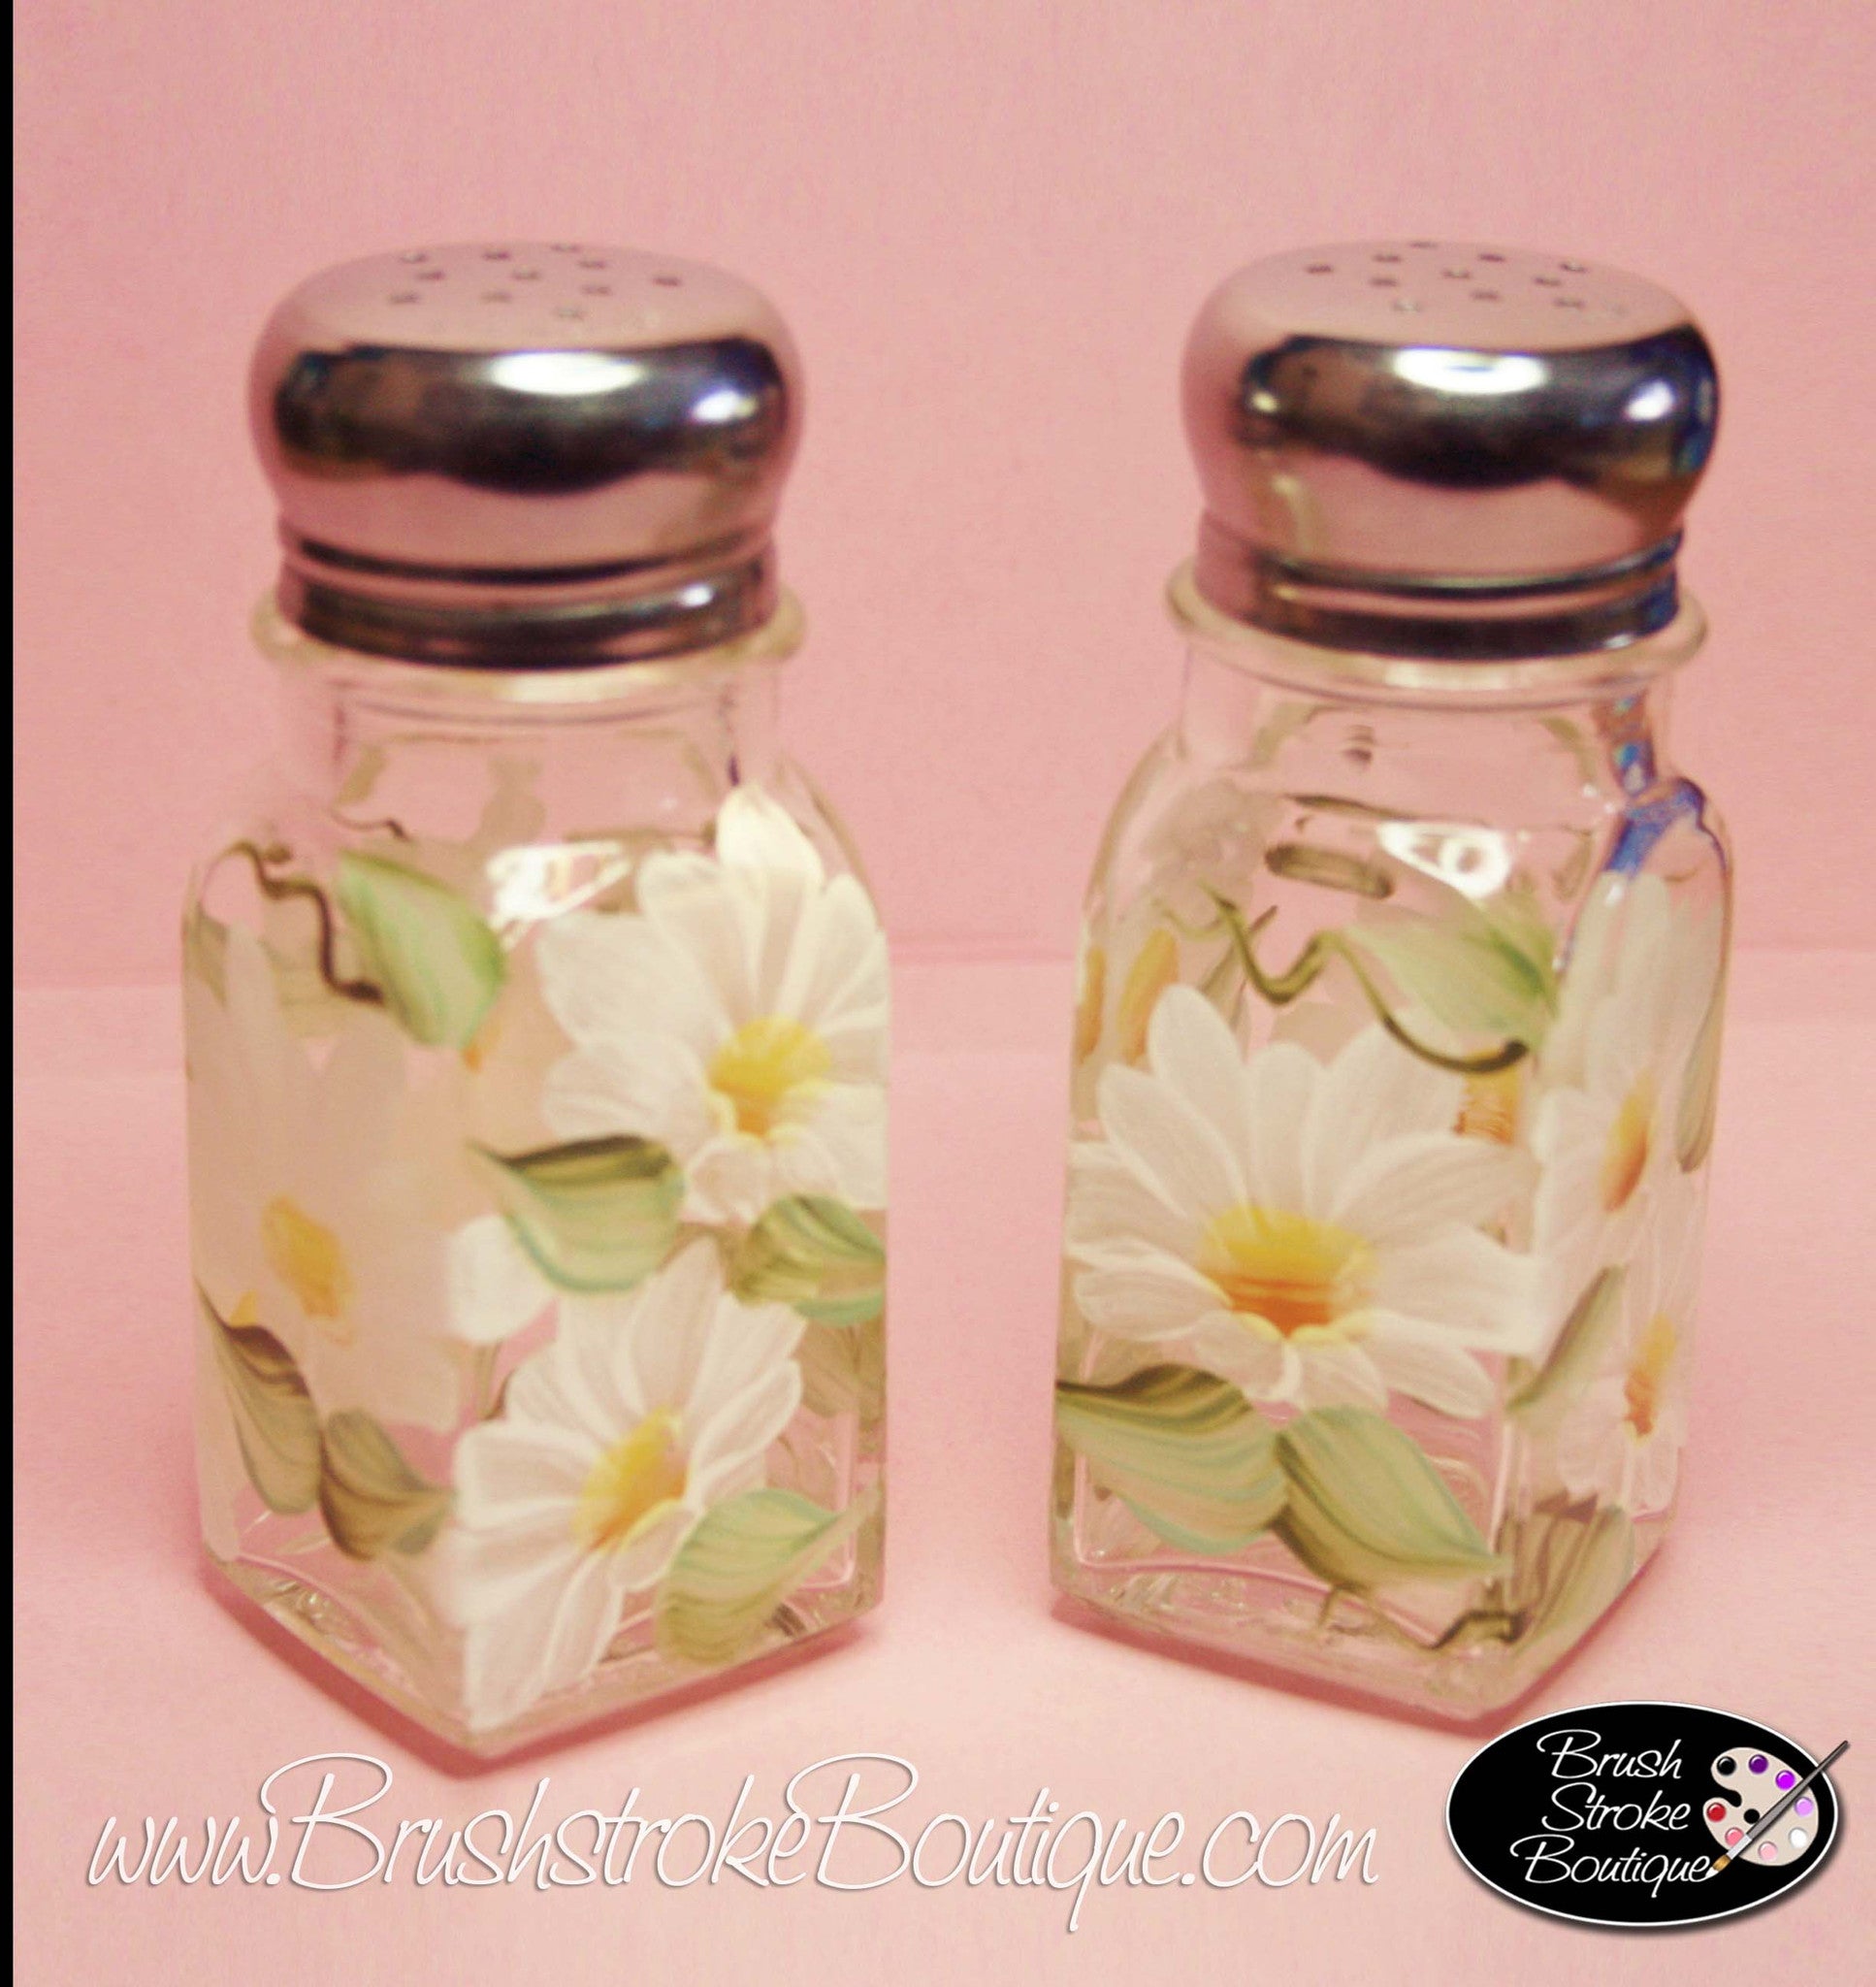 Sold at Auction: DAISY AND BUTTON PAIR OF SALT AND PEPPER SHAKERS